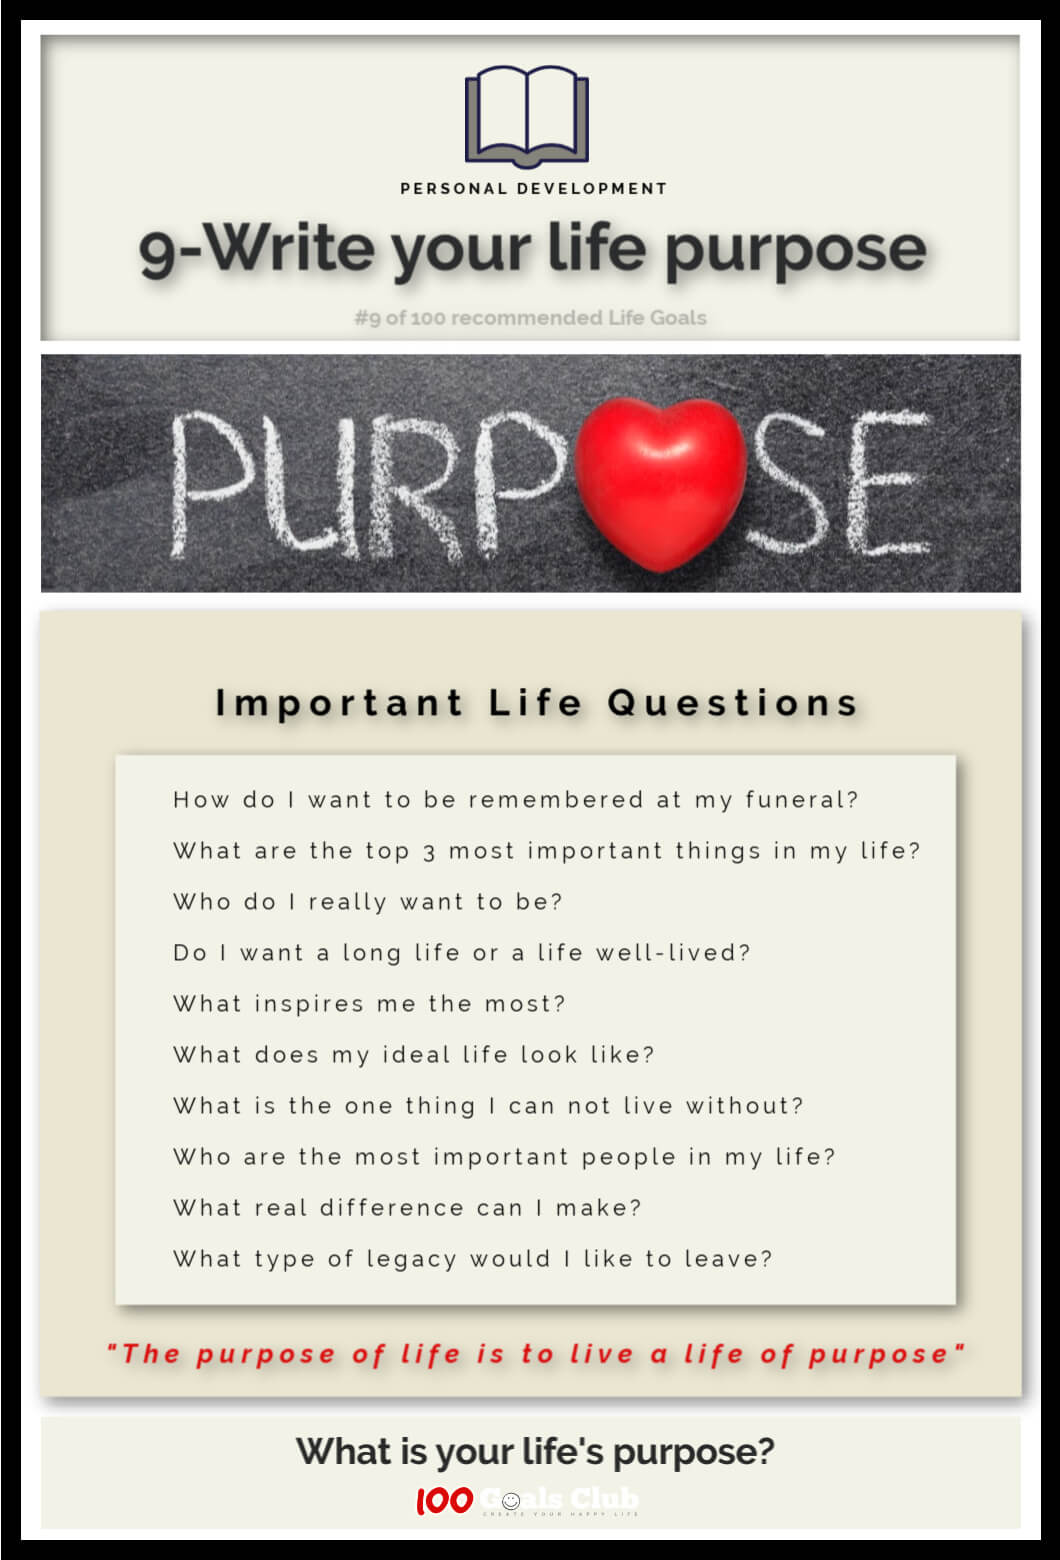 What is life purpose?